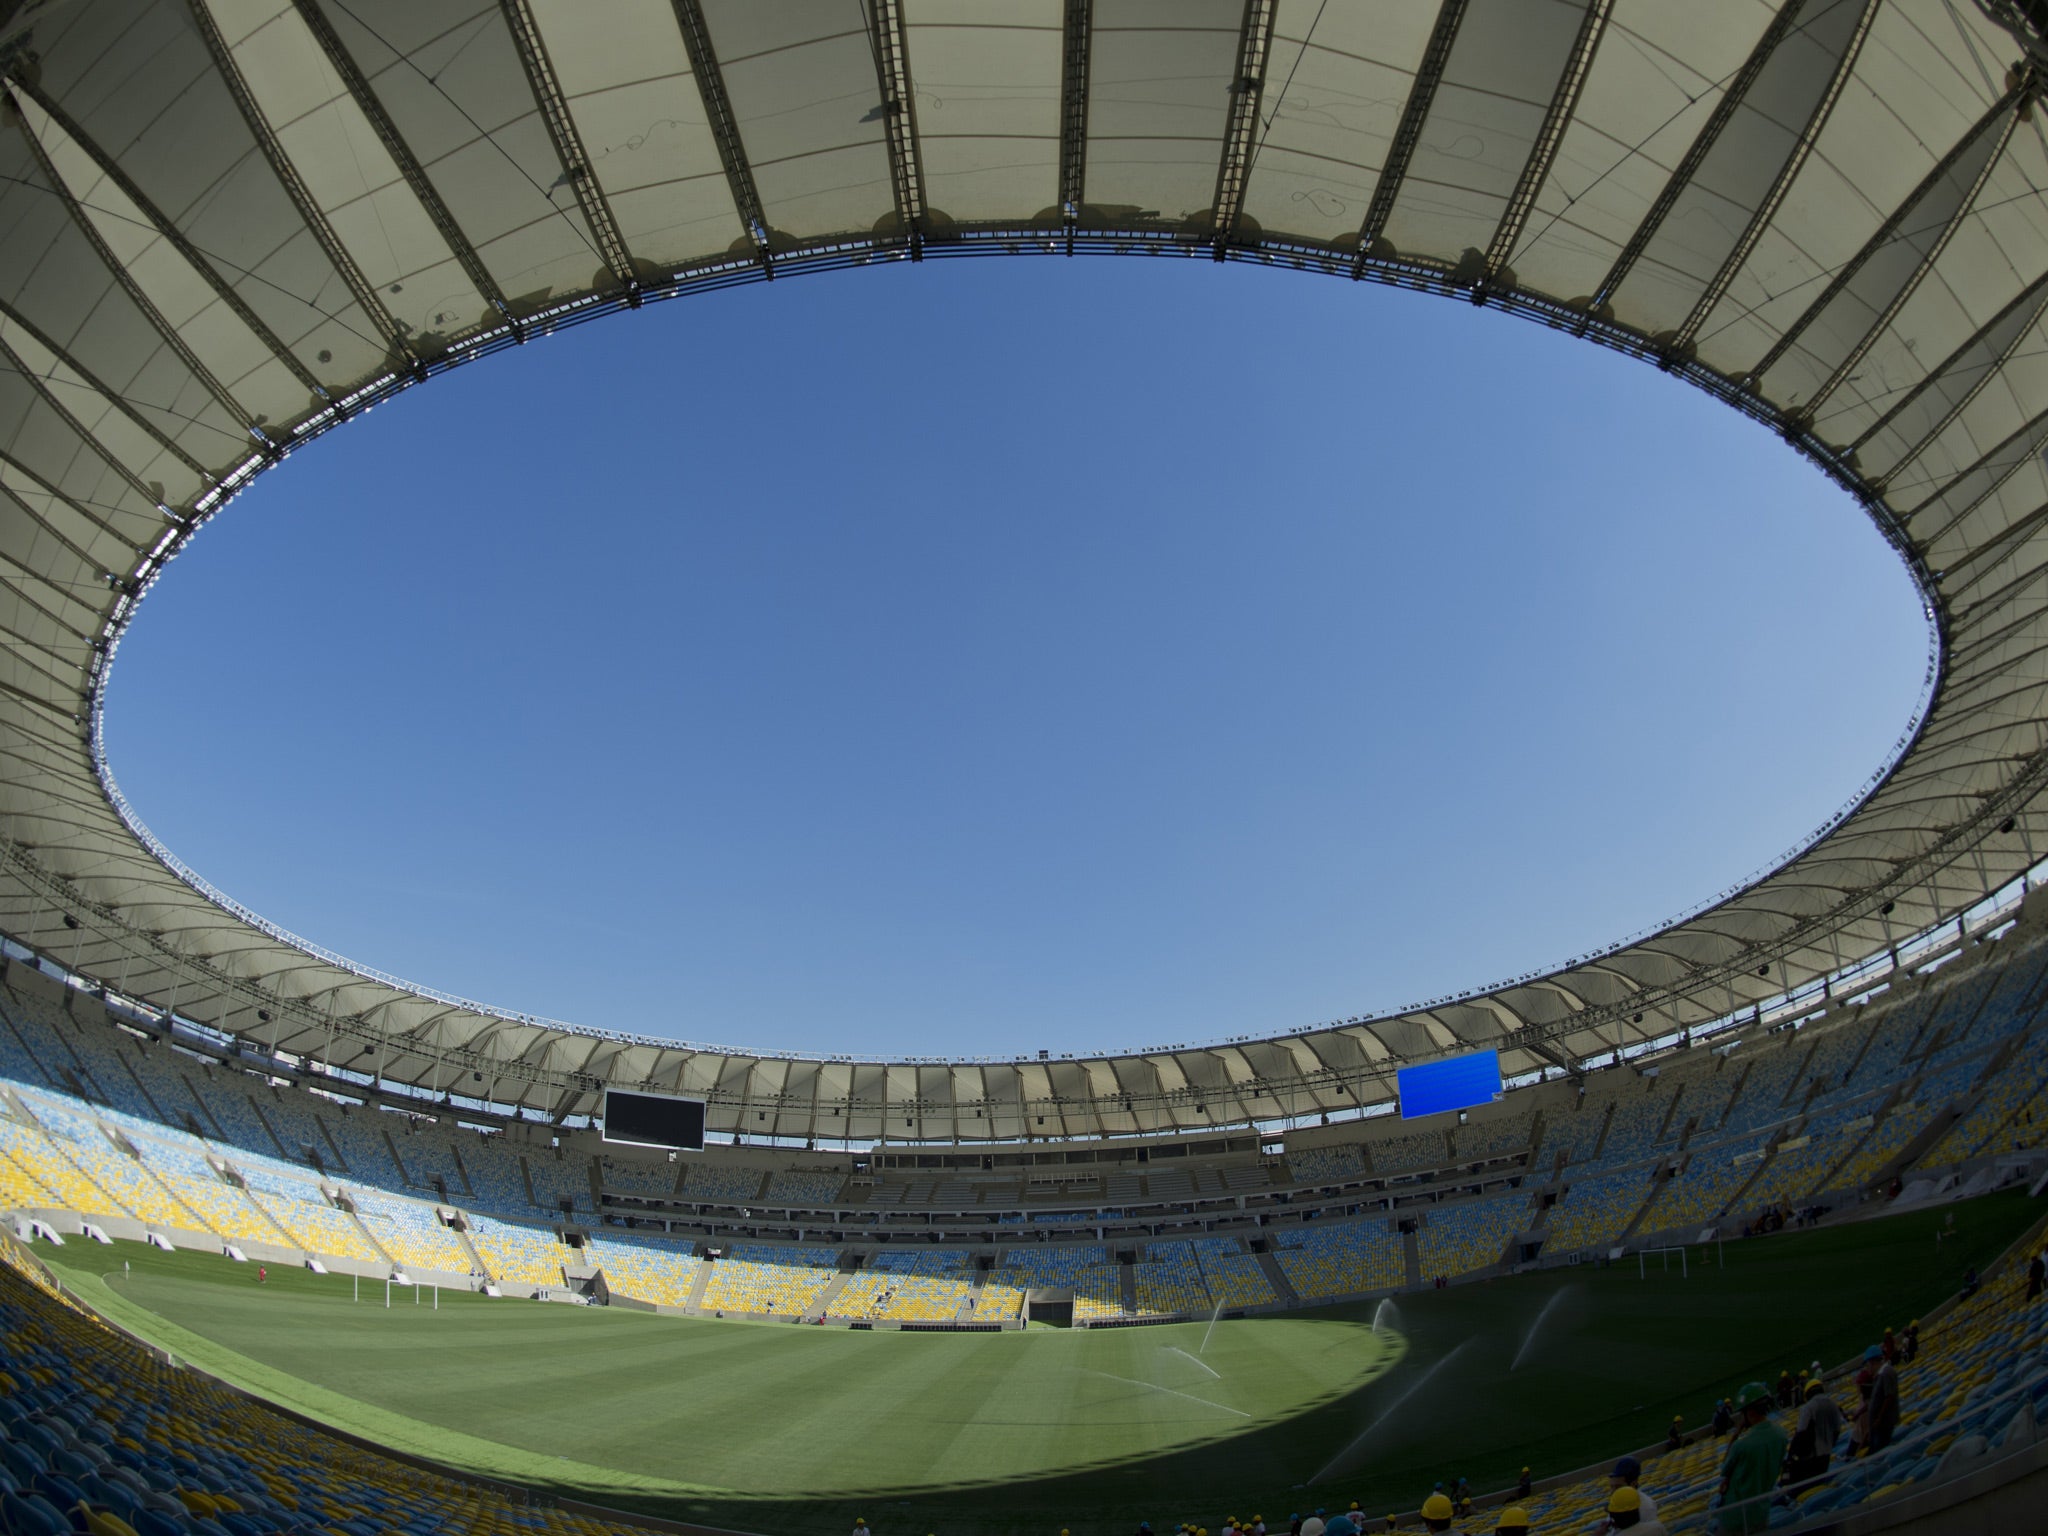 Brazilian football is in the process of receiving fourteen new or rebuilt stadiums